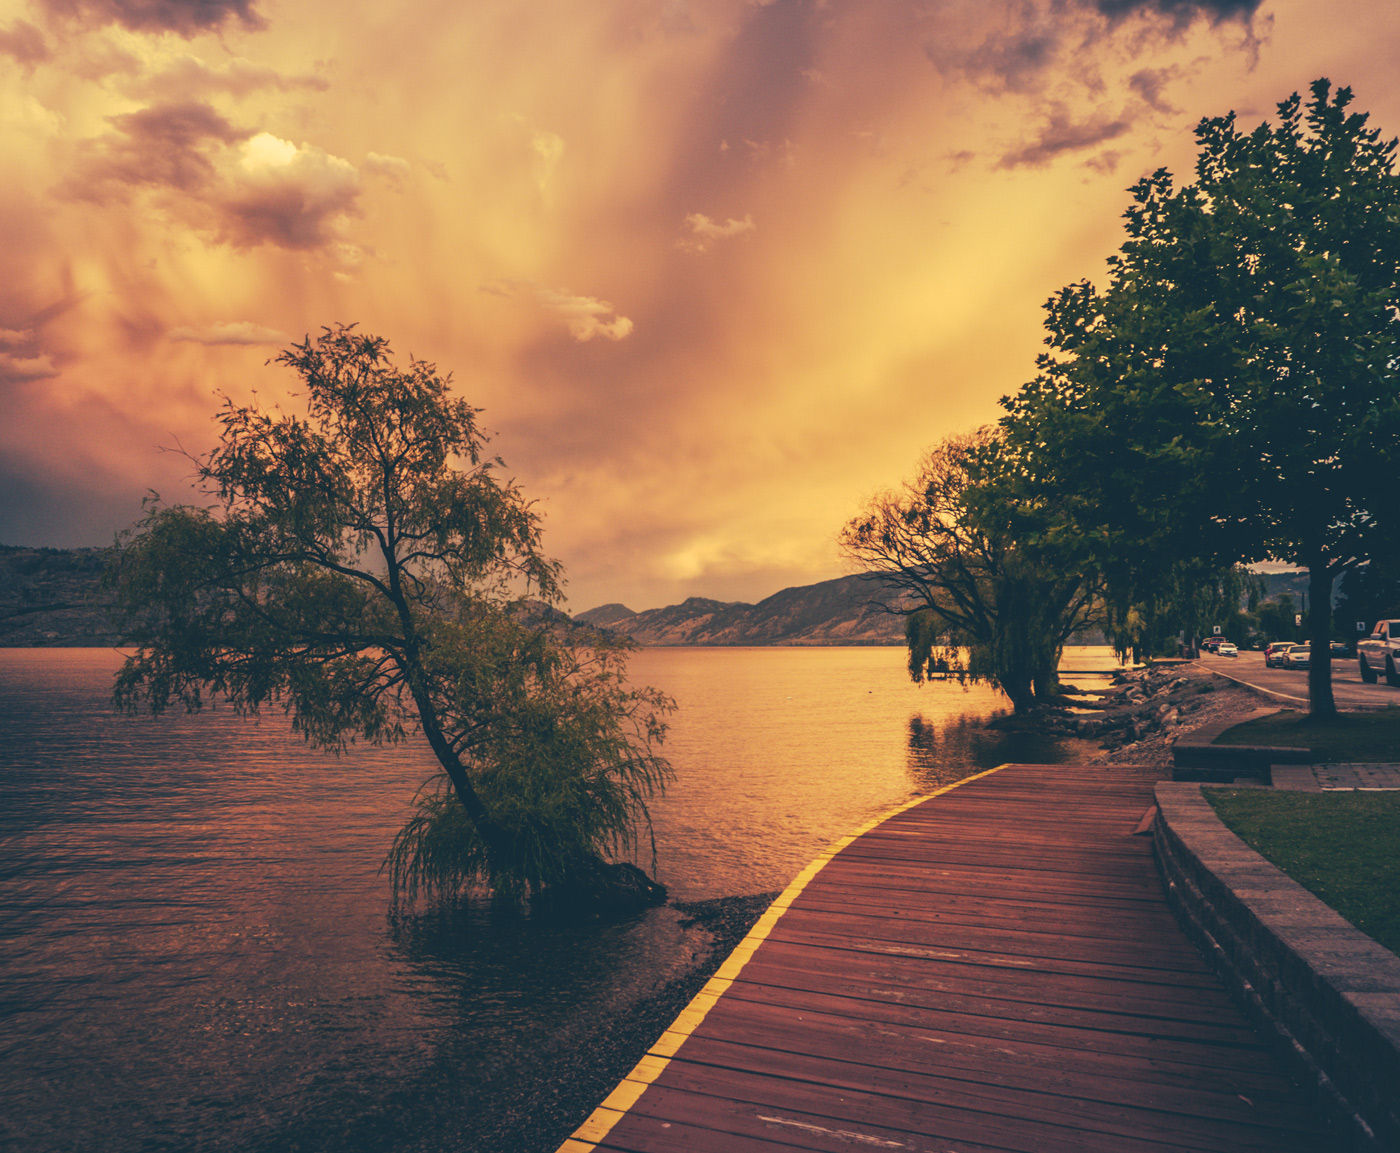 Catch one of those fabulous Okanagan sunsets when walking along the Waterfront Boardwalk trail, a short jaunt from our hotel in Kelowna.